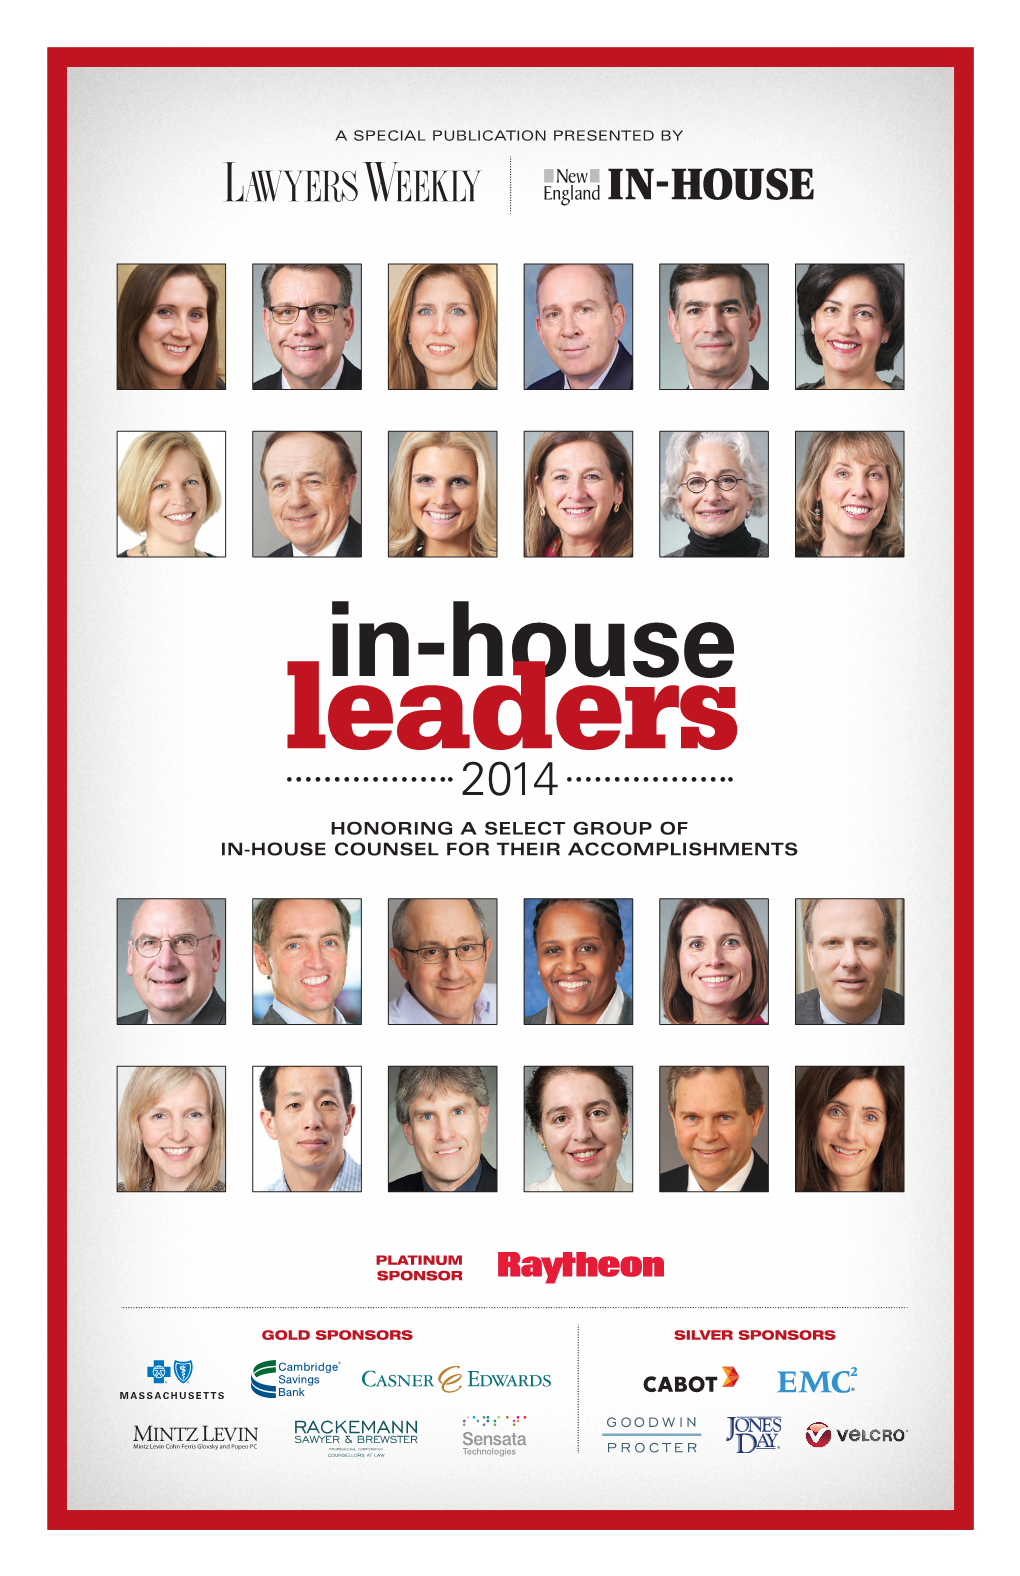 RACKEMANN SAWYER & BREWSTER Professional Corporation COUNSELLORS at LAW B2 In-House Leaders | 2014